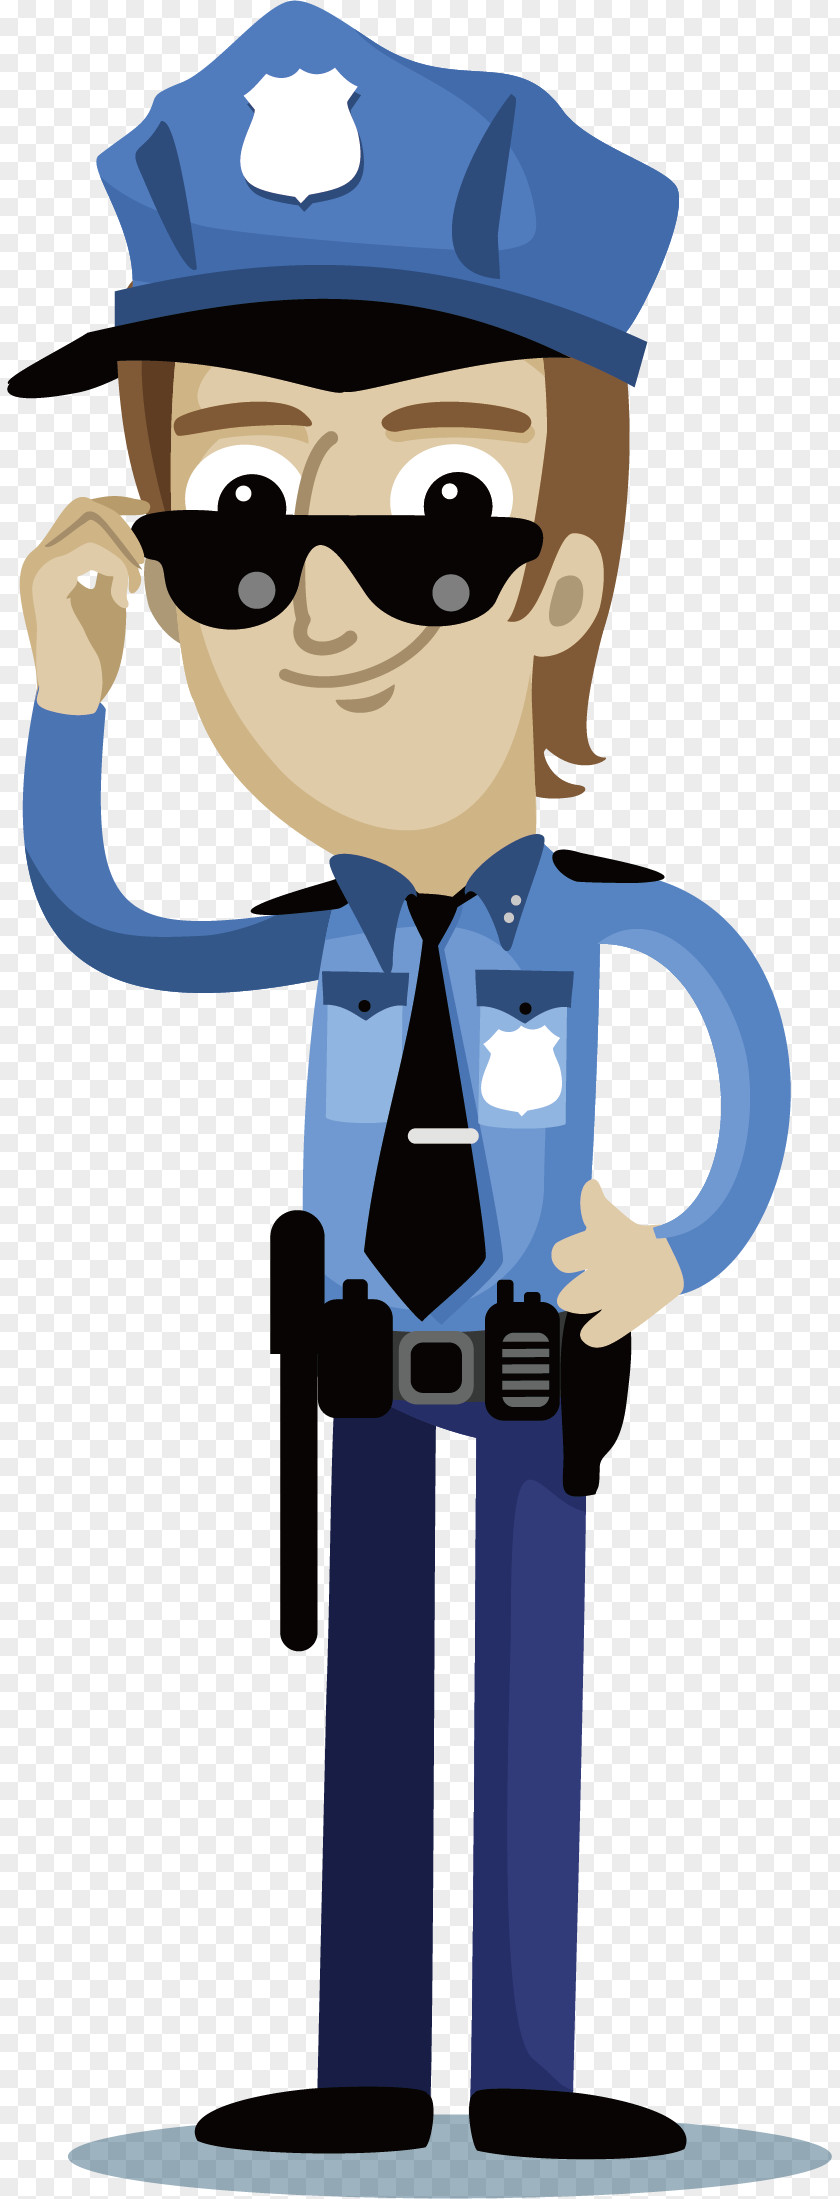 Wearing Sunglasses Of The Police Officer Cartoon PNG